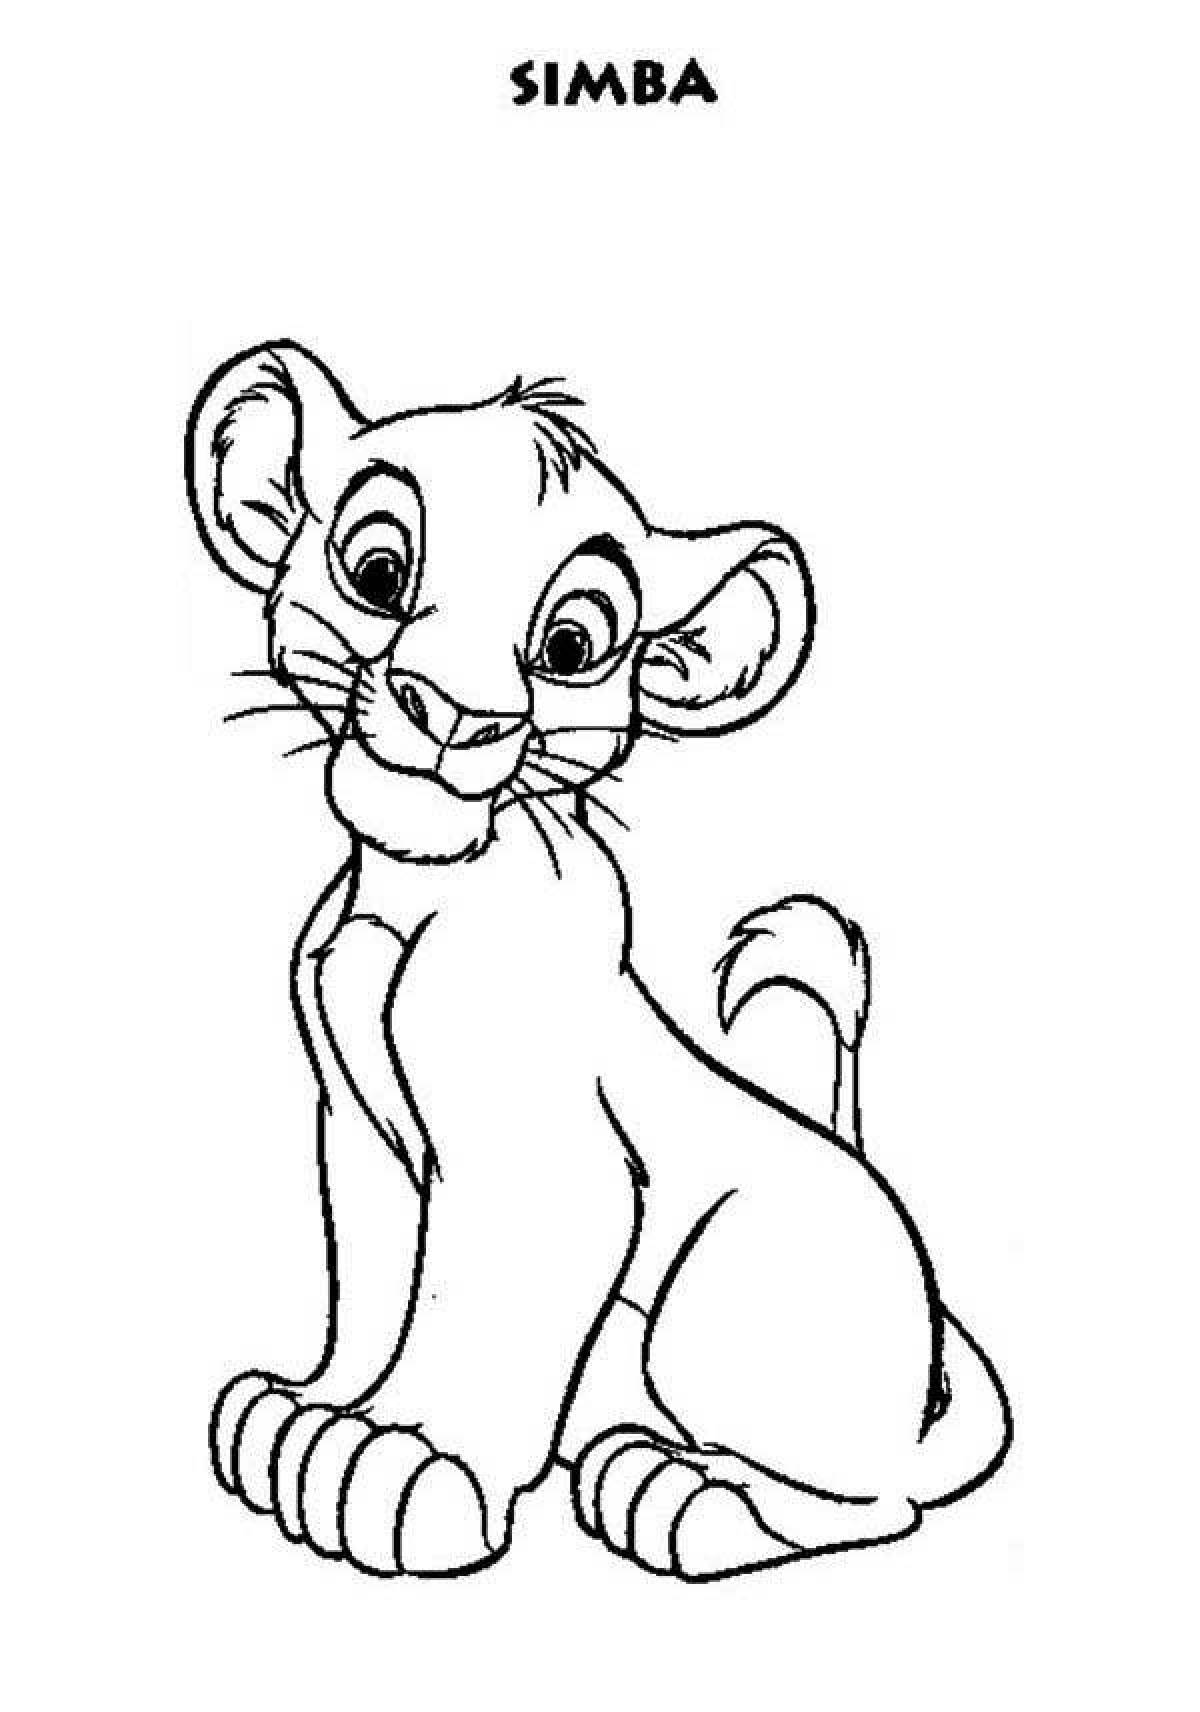 Coloring page adorable cat simba